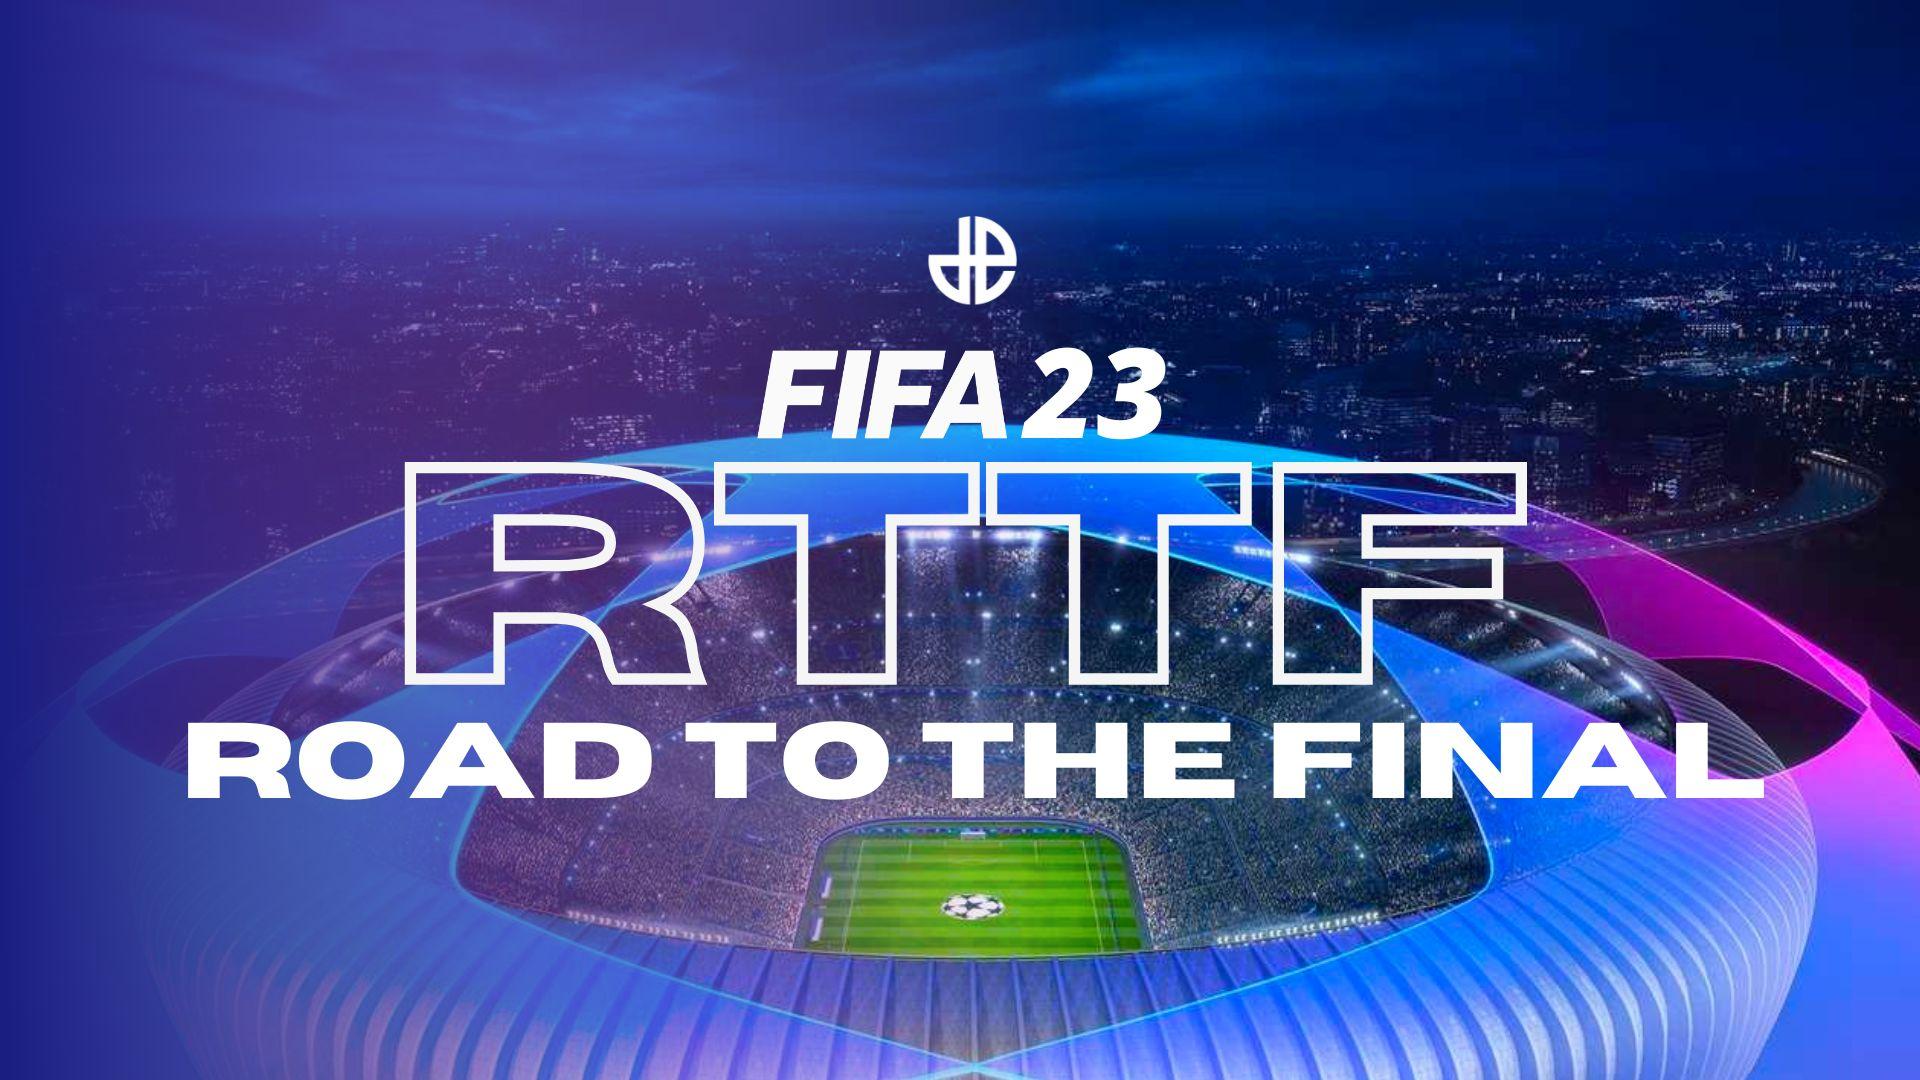 FIFA 23 ratings coming tomorrow - not like they've been known for